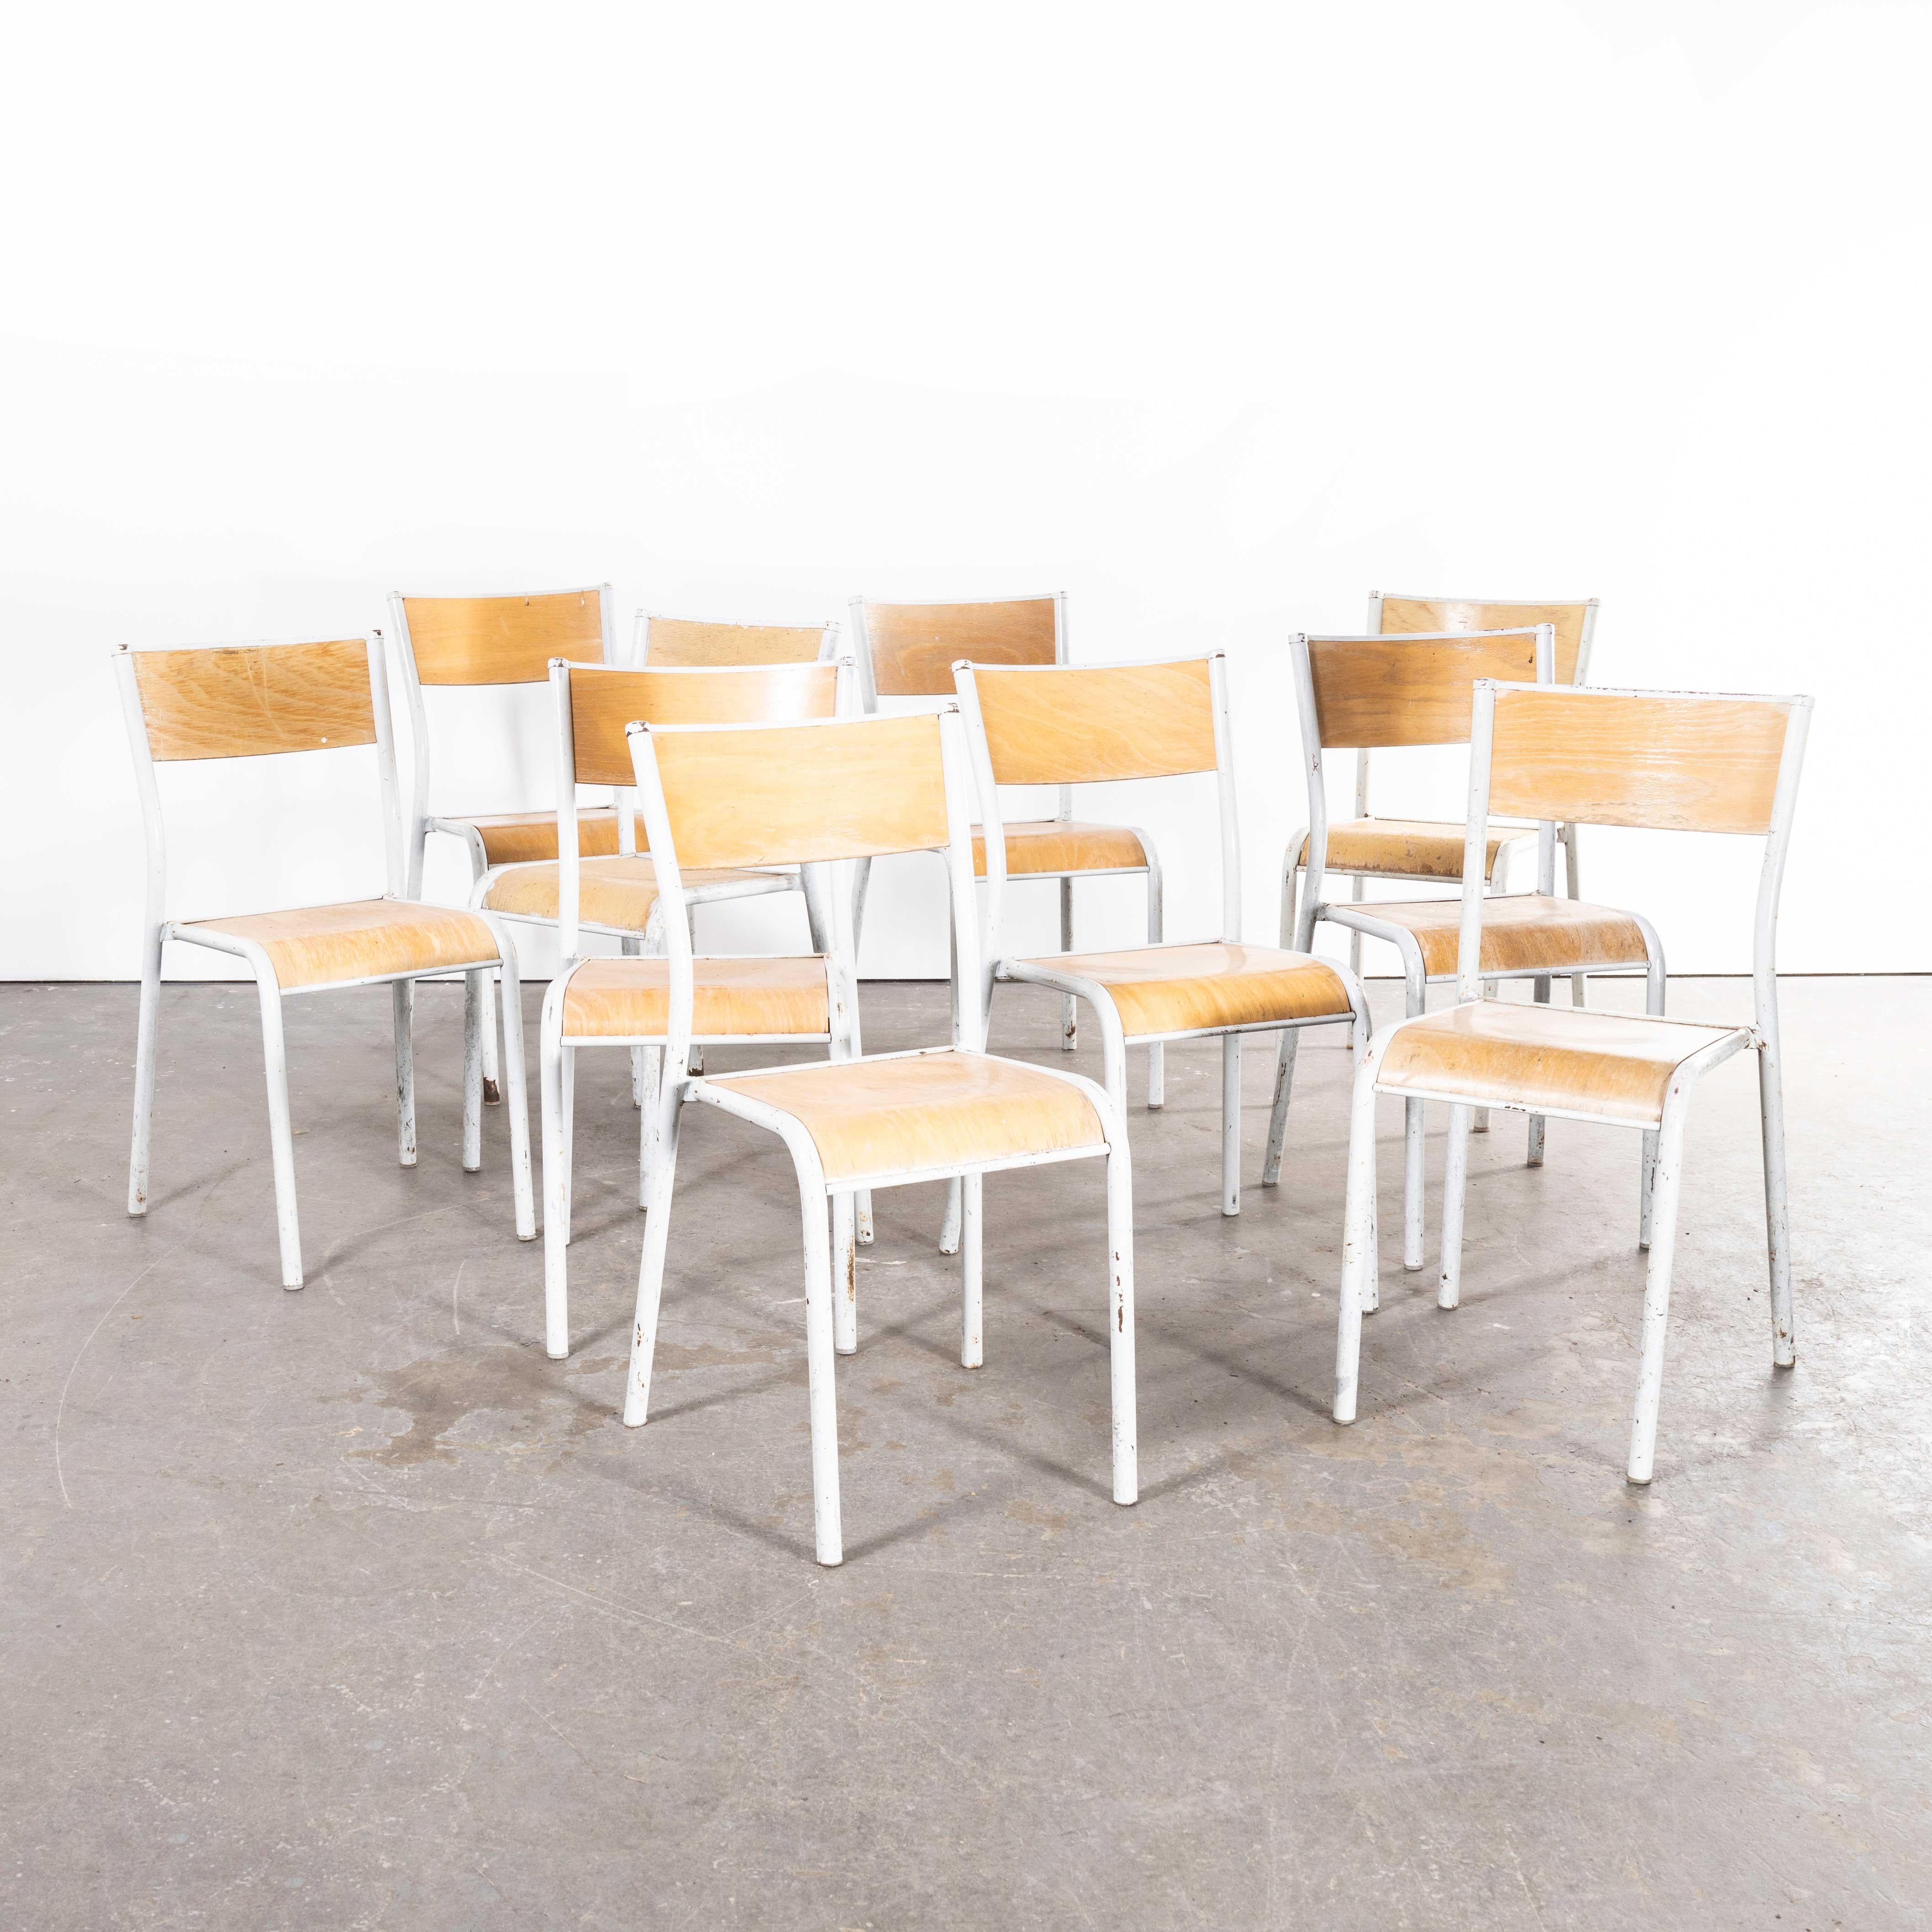 1950s French Mullca Stacking School dining chairs, Model 510 – white – set of ten
1950s French Mullca Stacking School dining chairs, Model 510 – white – set of ten. One of our most favourite chairs, in 1947 Robert Muller and Gaston Cavaillon